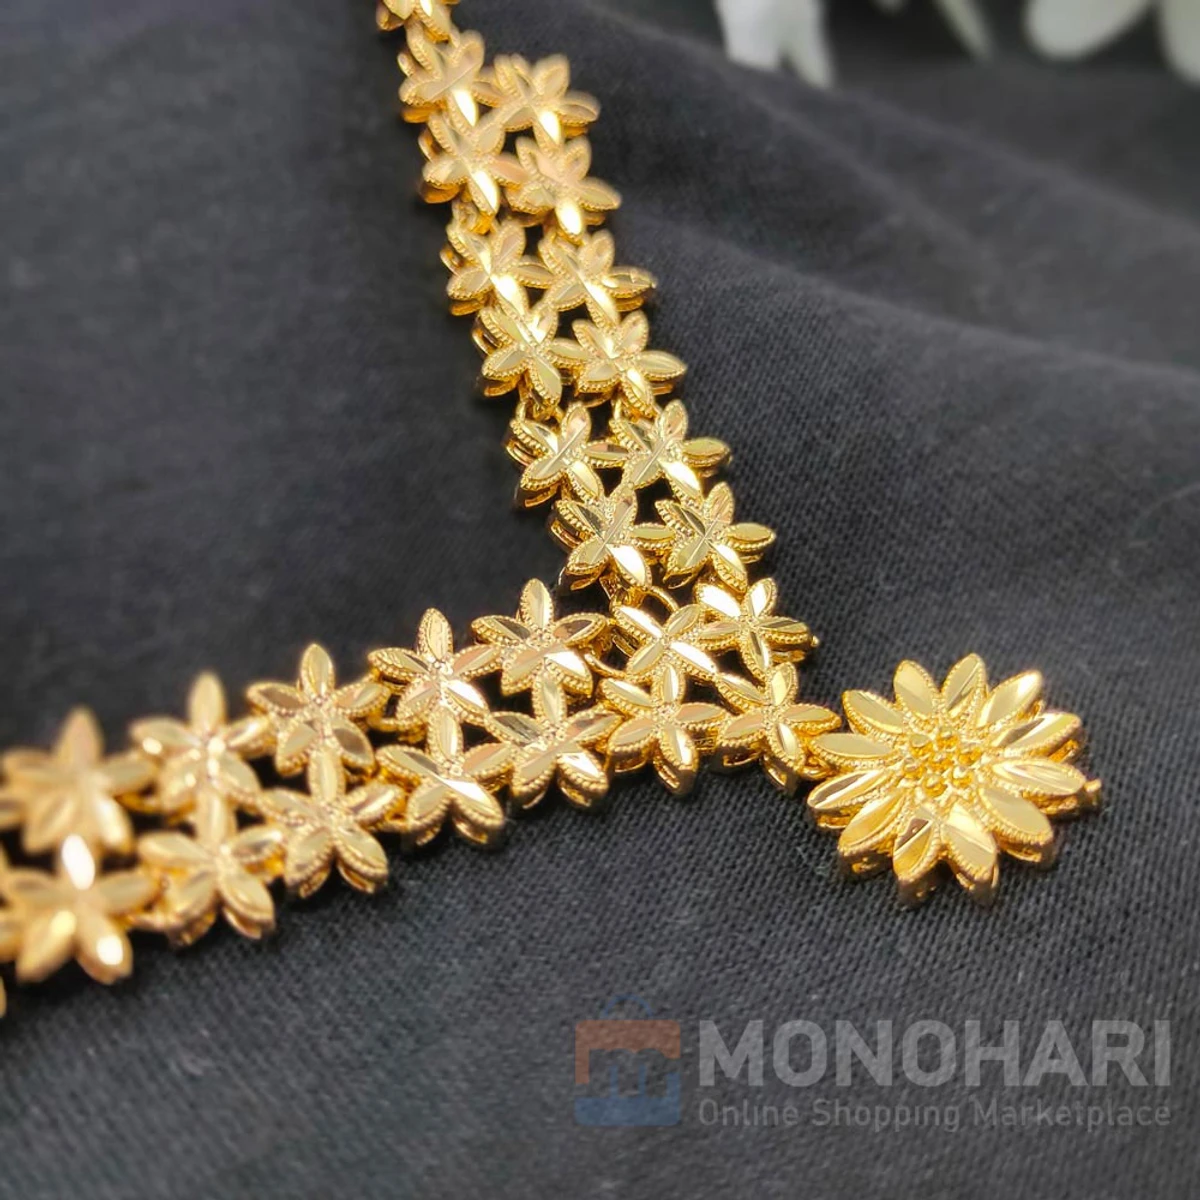 Small Flowers Necklace - Indian Gold Colour Necklace - 22K Gold Plating Necklace